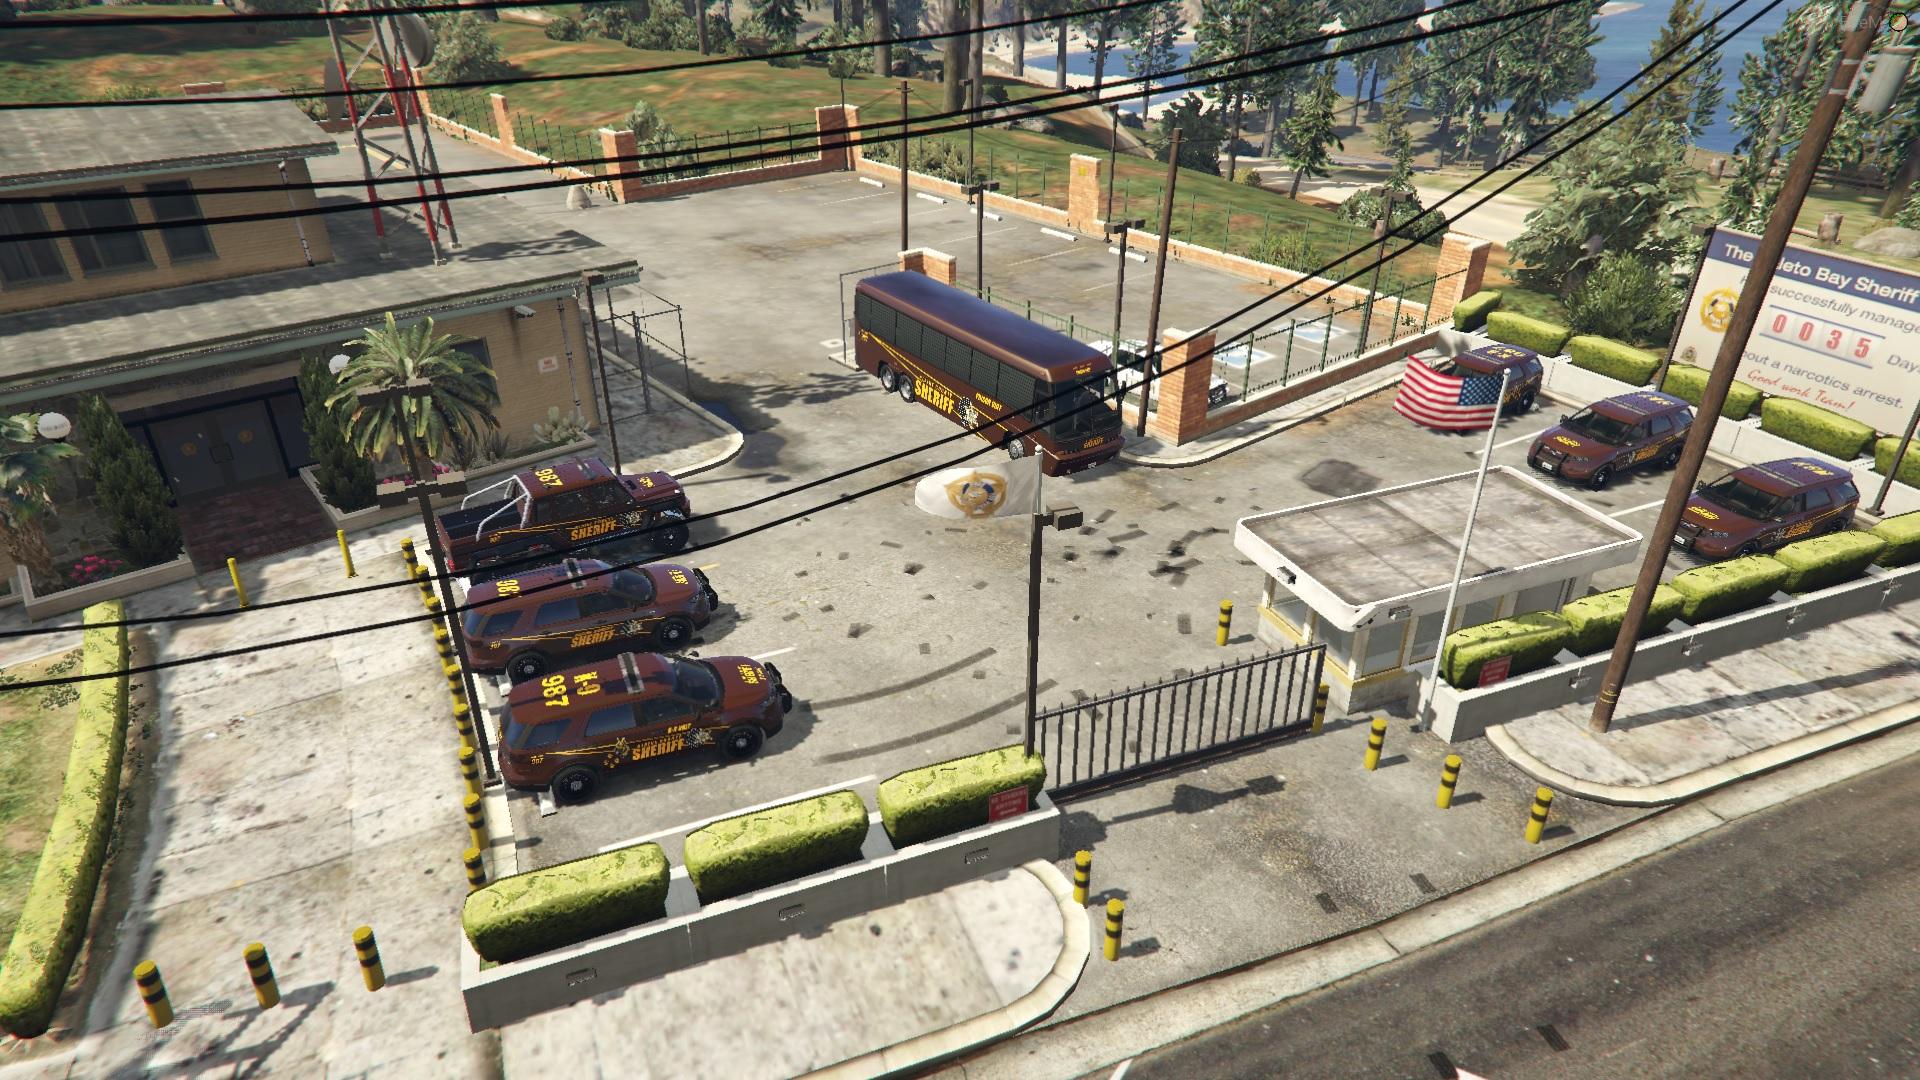 Sheriff Paleto Bay Closed Parking - Mapping Exterior [YMAP] - GTA5-Mods.com